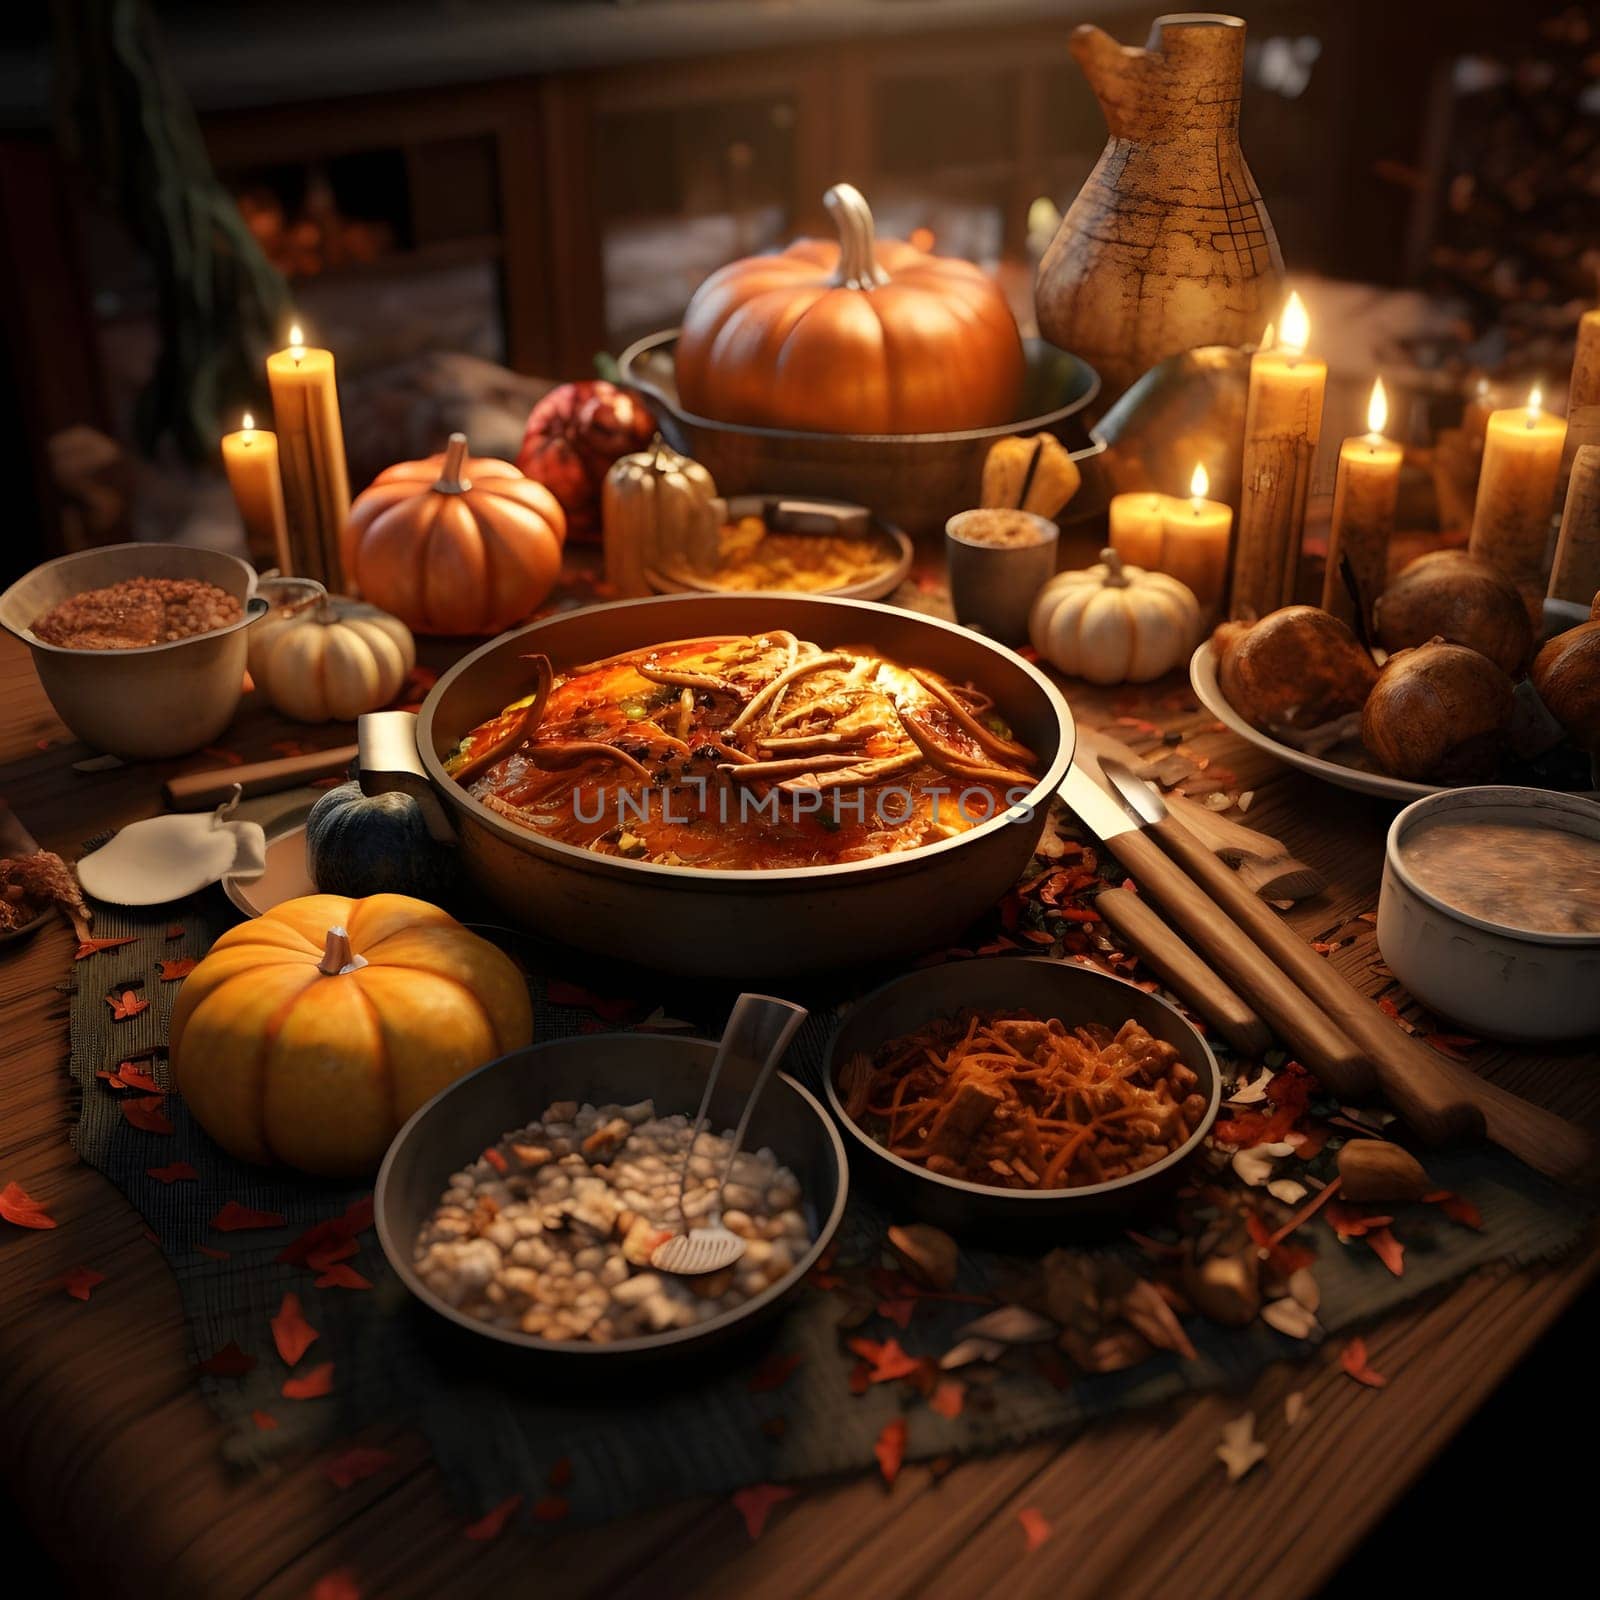 Photo of a table set with pumpkin soup, pumpkins, spices, candles. Pumpkin as a dish of thanksgiving for the harvest. by ThemesS